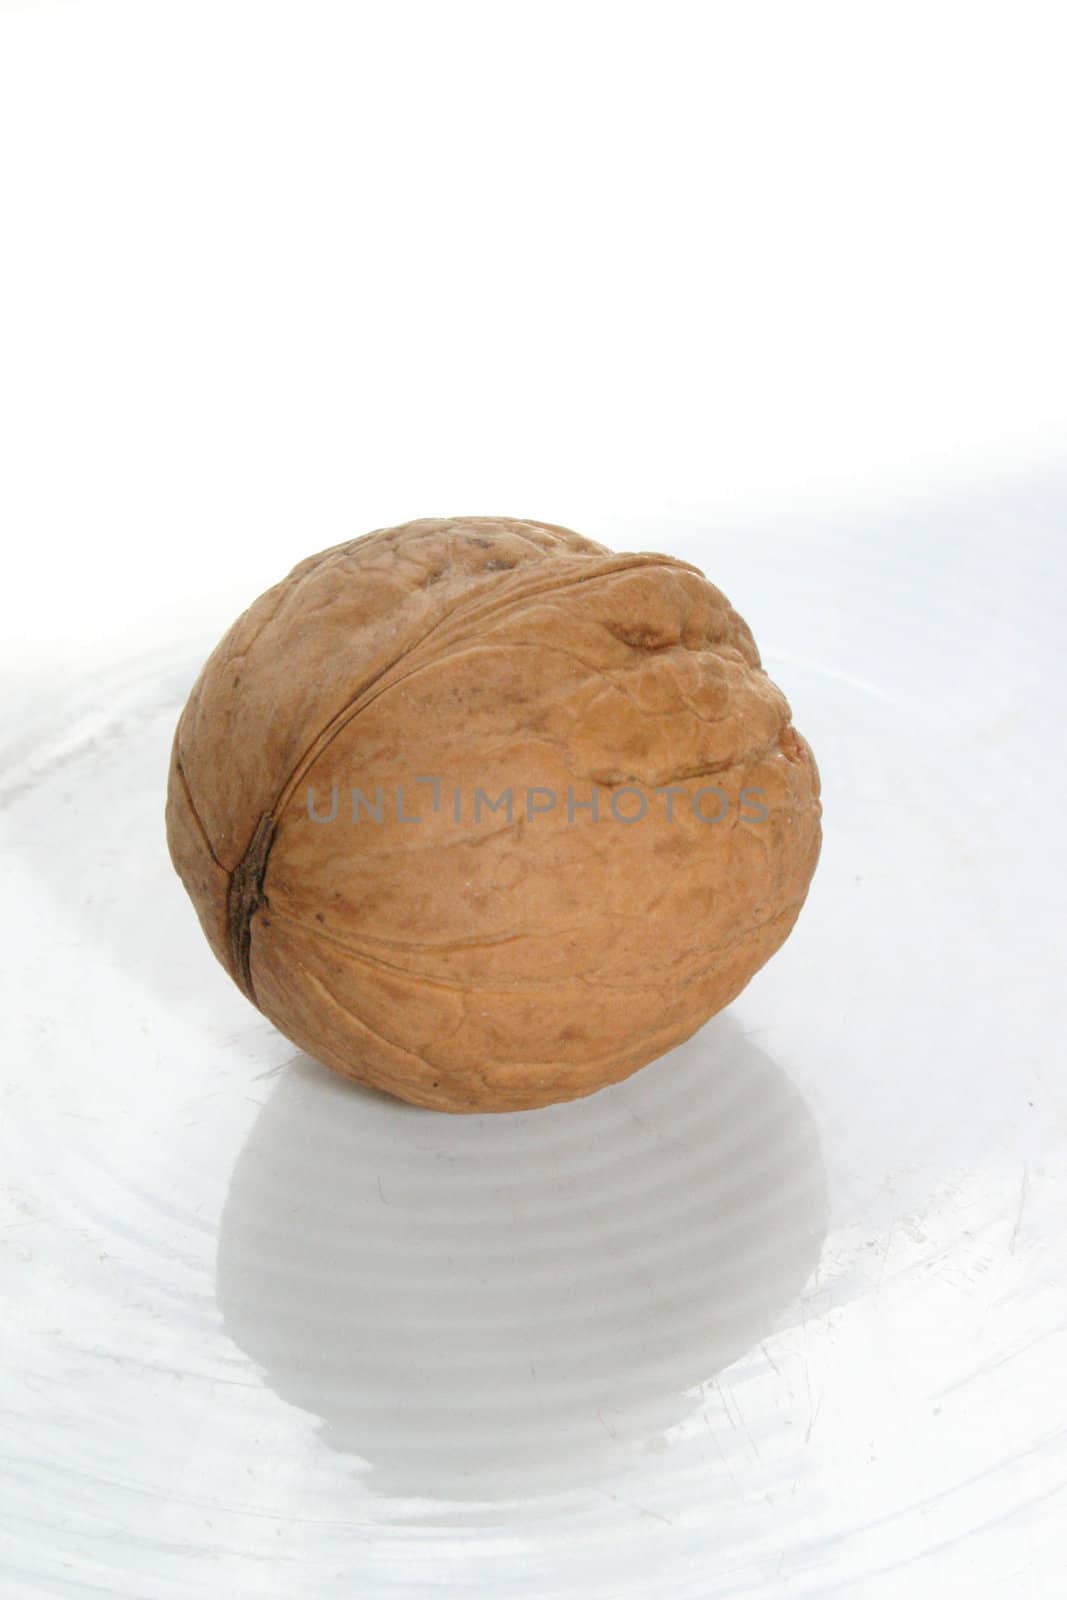 close up of a walnut on white background